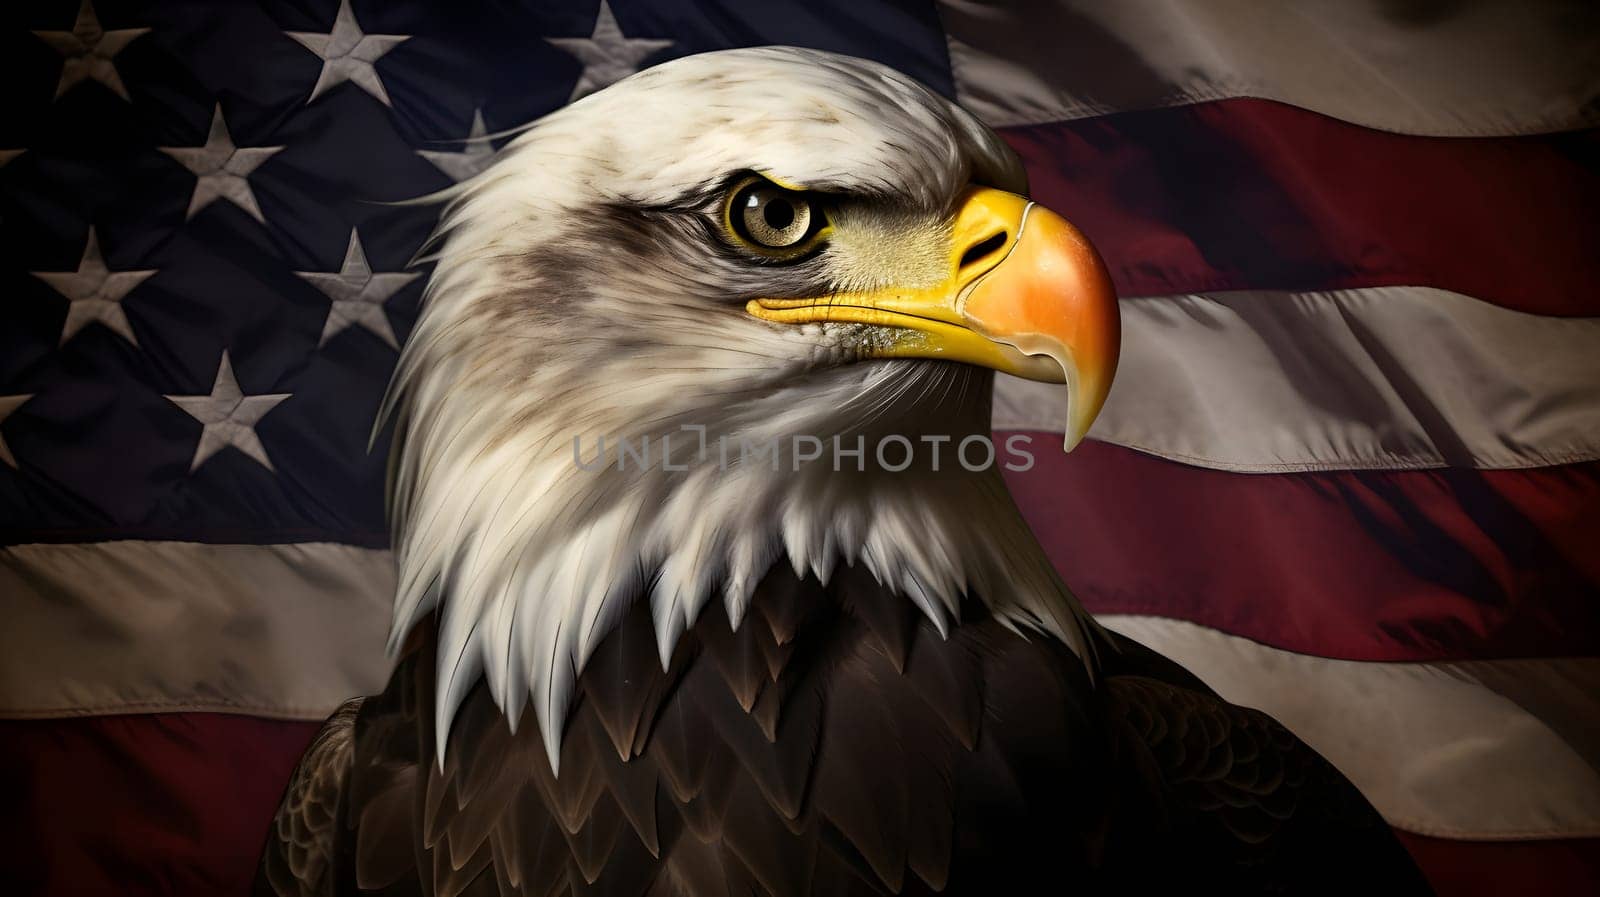 North American Bald Eagle on American flag background. Neural network generated in May 2023. Not based on any actual scene or pattern.